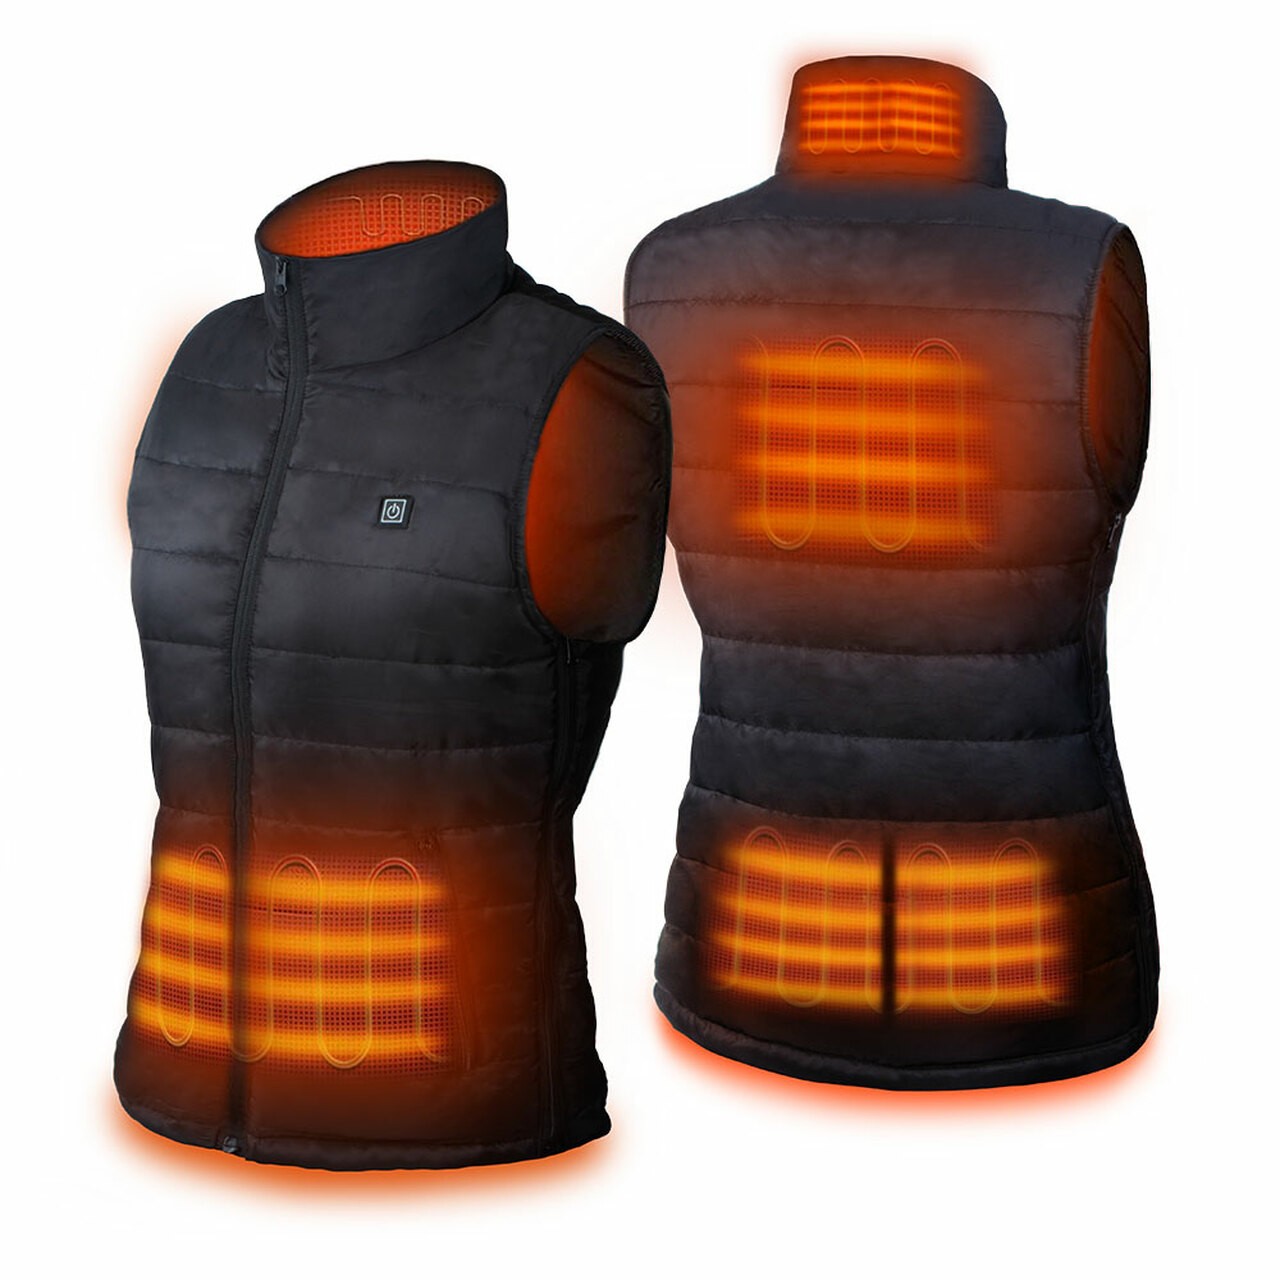 No Battery is Included Heated Vest USB Electric Heated Coat for Men & Women Size Adjustable Winter Sports Heated Clothing 